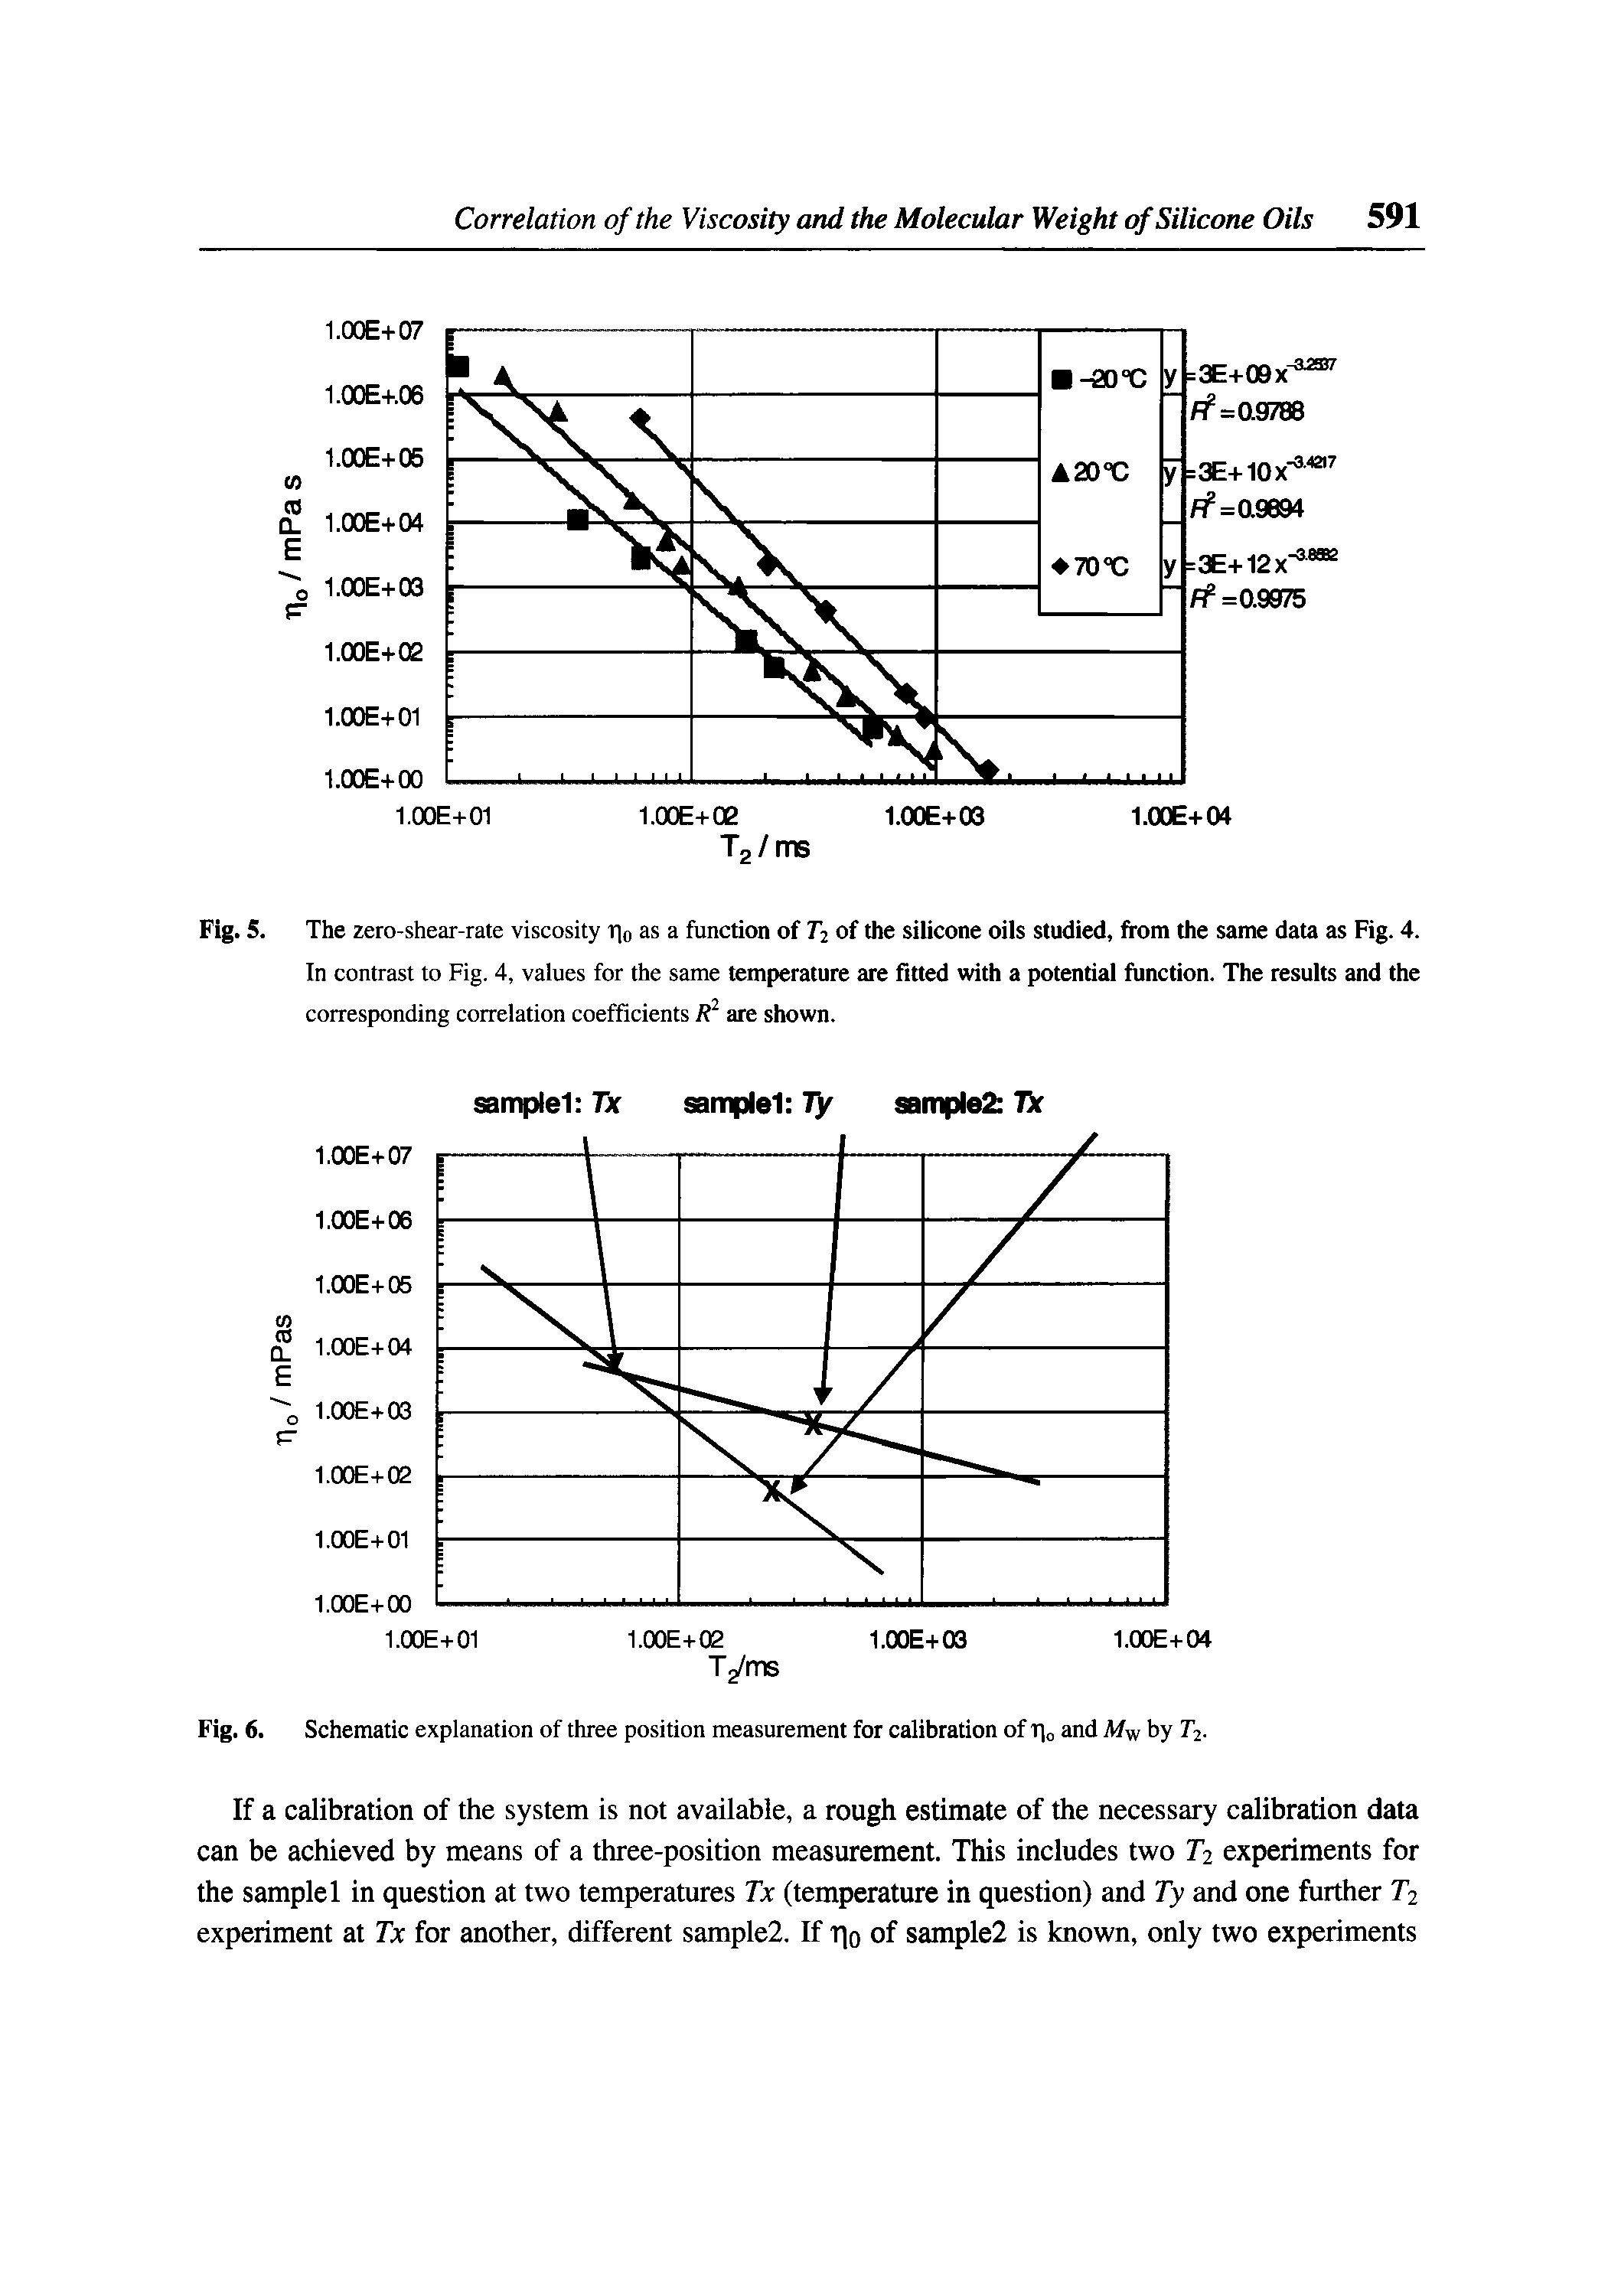 Fig. 5. The zero-shear-rate viscosity % as a function of T2 of the silicone oils studied, from the same data as Fig. 4.